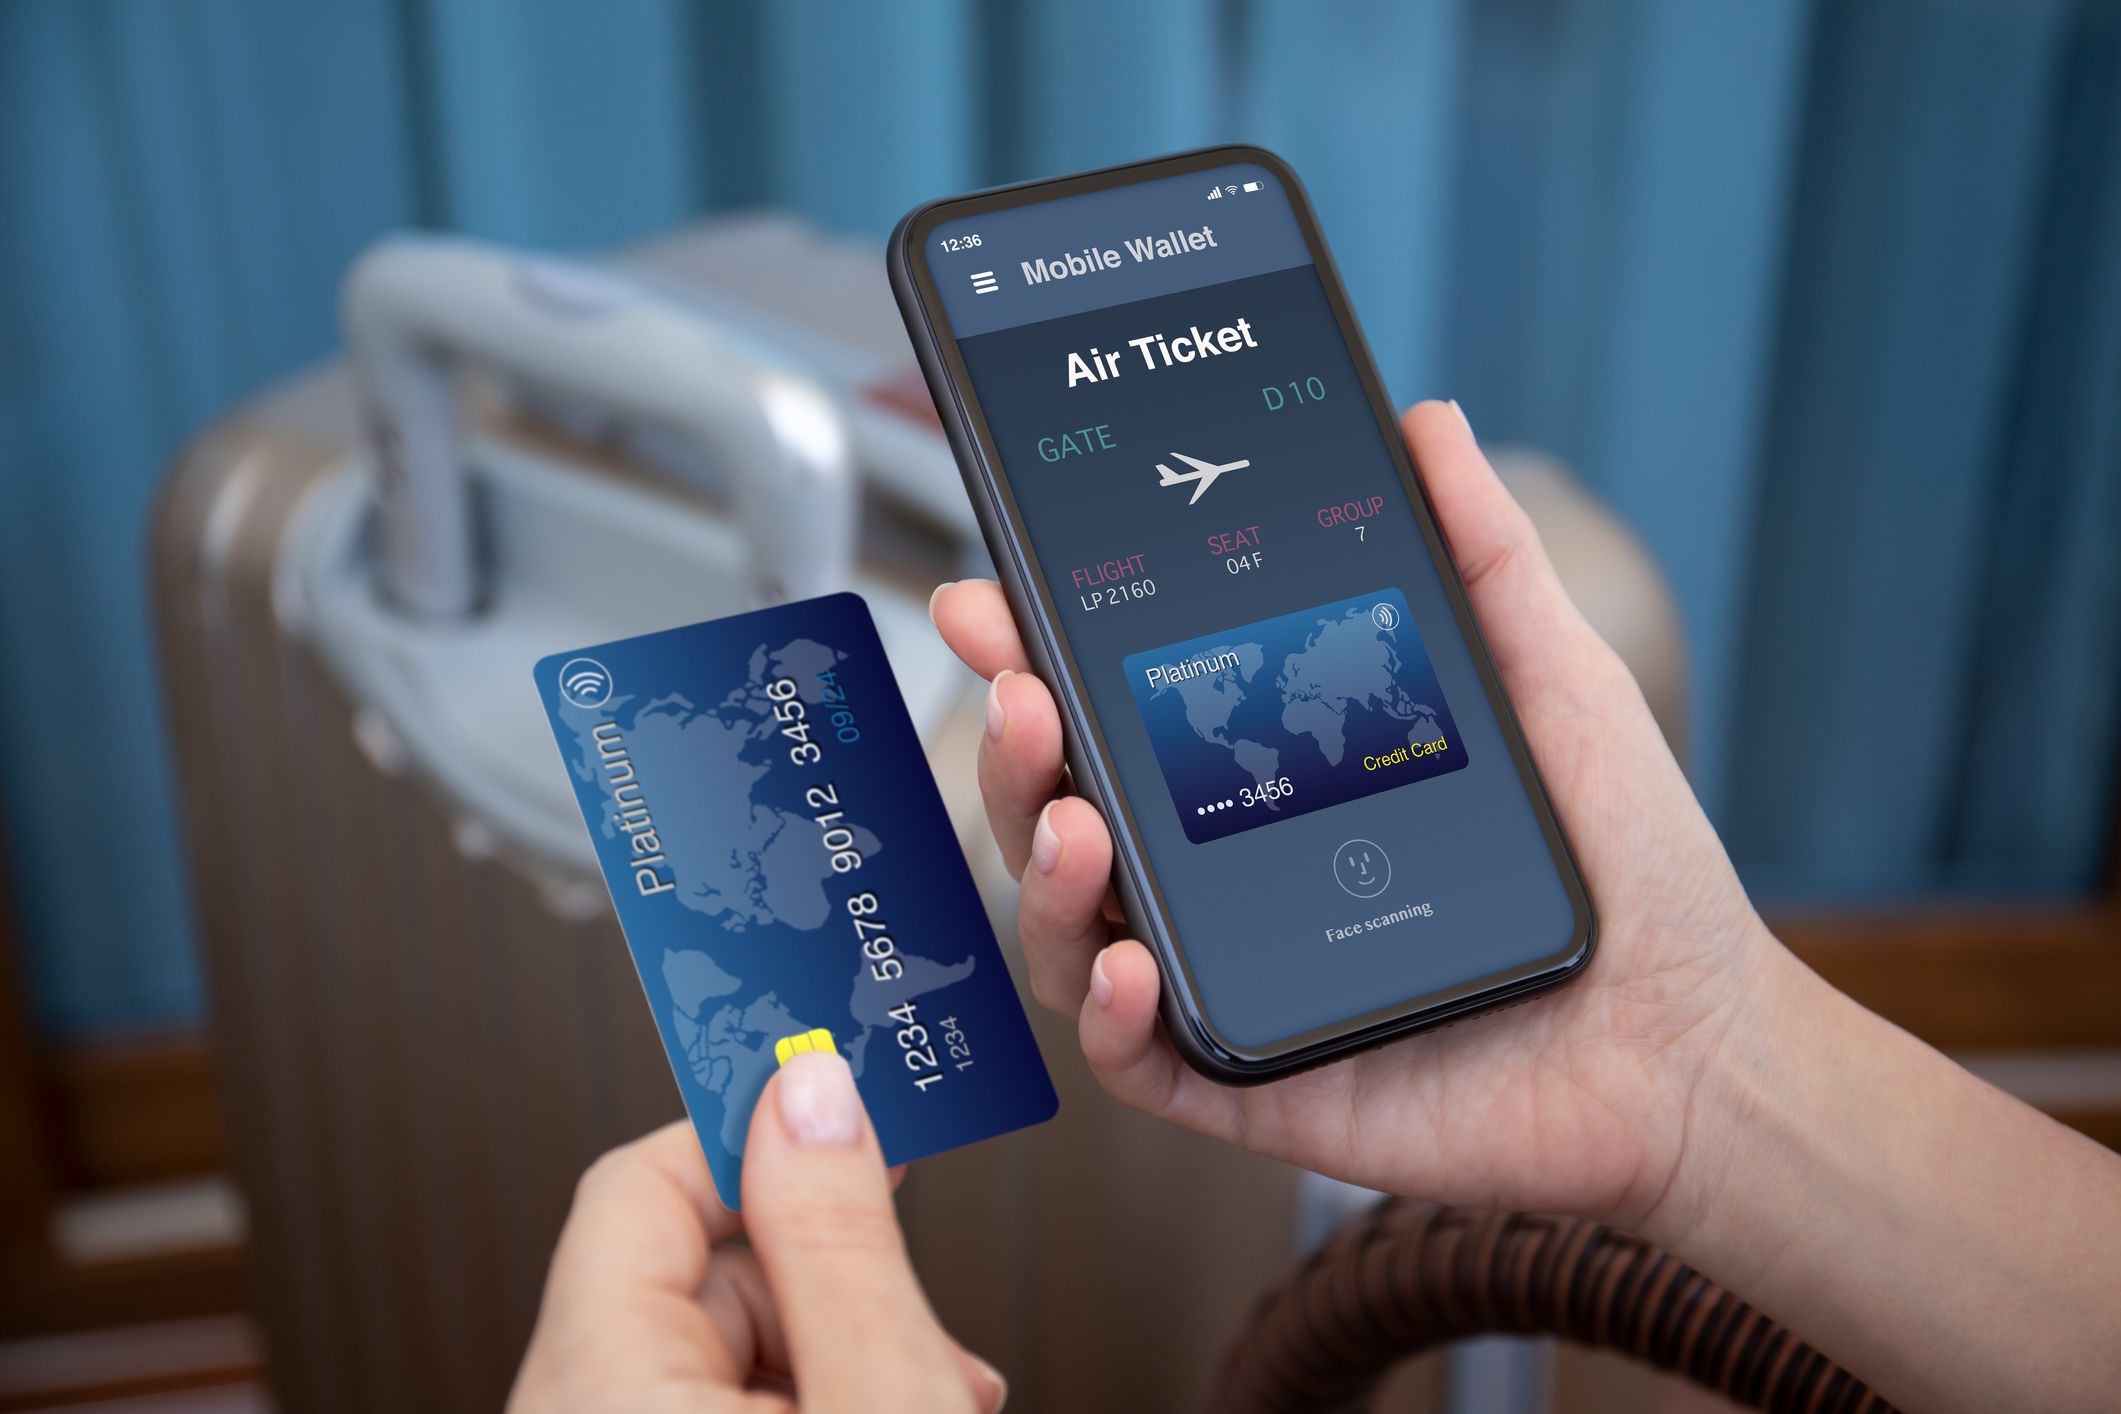 <h1><p><a href="https://www.msn.com/en-us/travel/news/4-ways-travel-credit-cards-can-really-save-you-big-on-your-next-vacation/ss-AA19dn7t#image=2">4 ways travel credit cards can really save you big on your next vacation</a></p></h1>